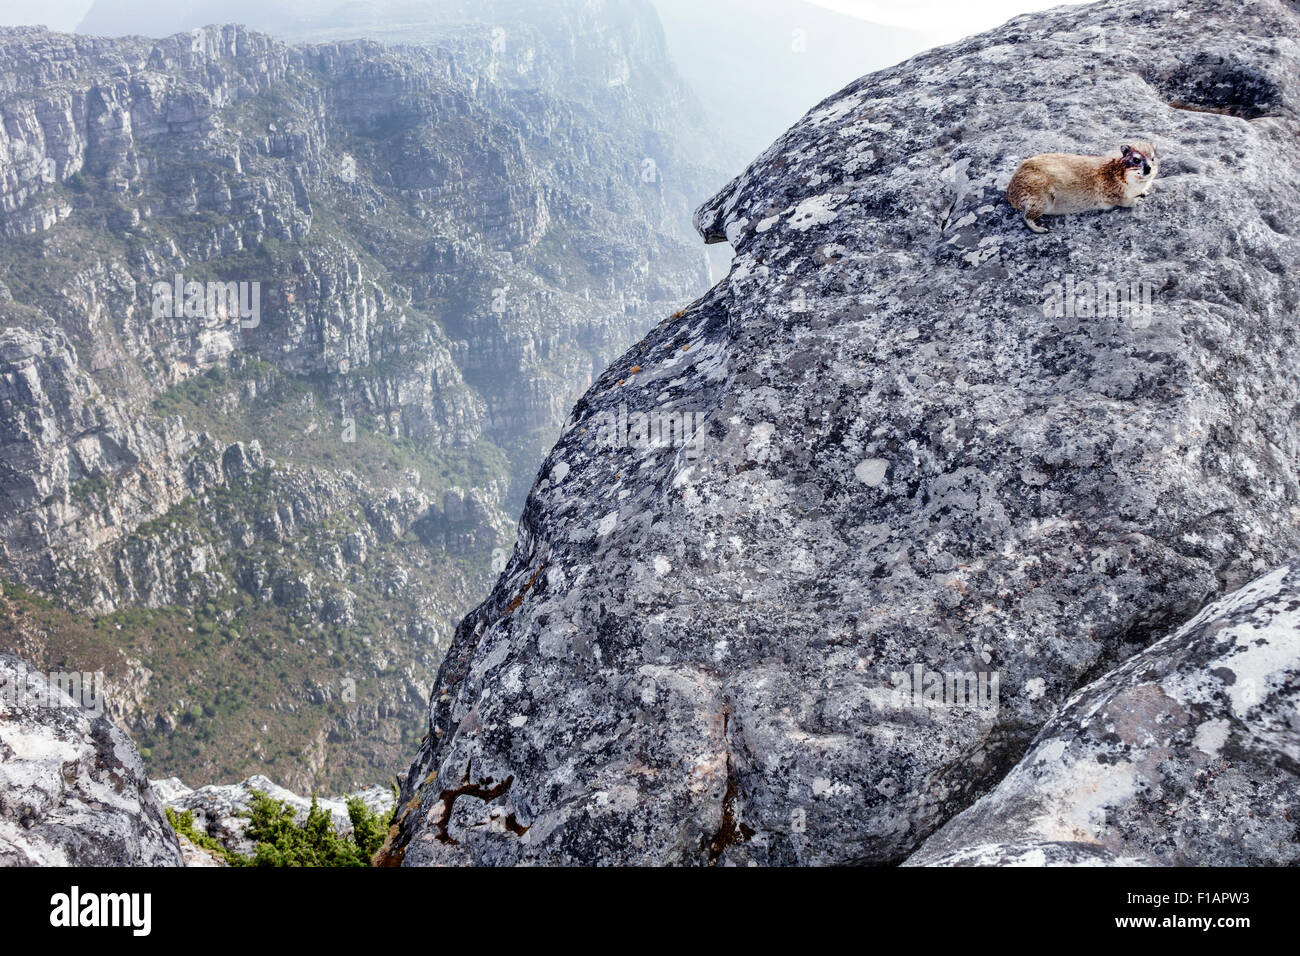 Cape Town South Africa,Table Mountain National Park,nature reserve,top,rock hyrax,Procavia capensis,cliff,SAfri150312117 Stock Photo